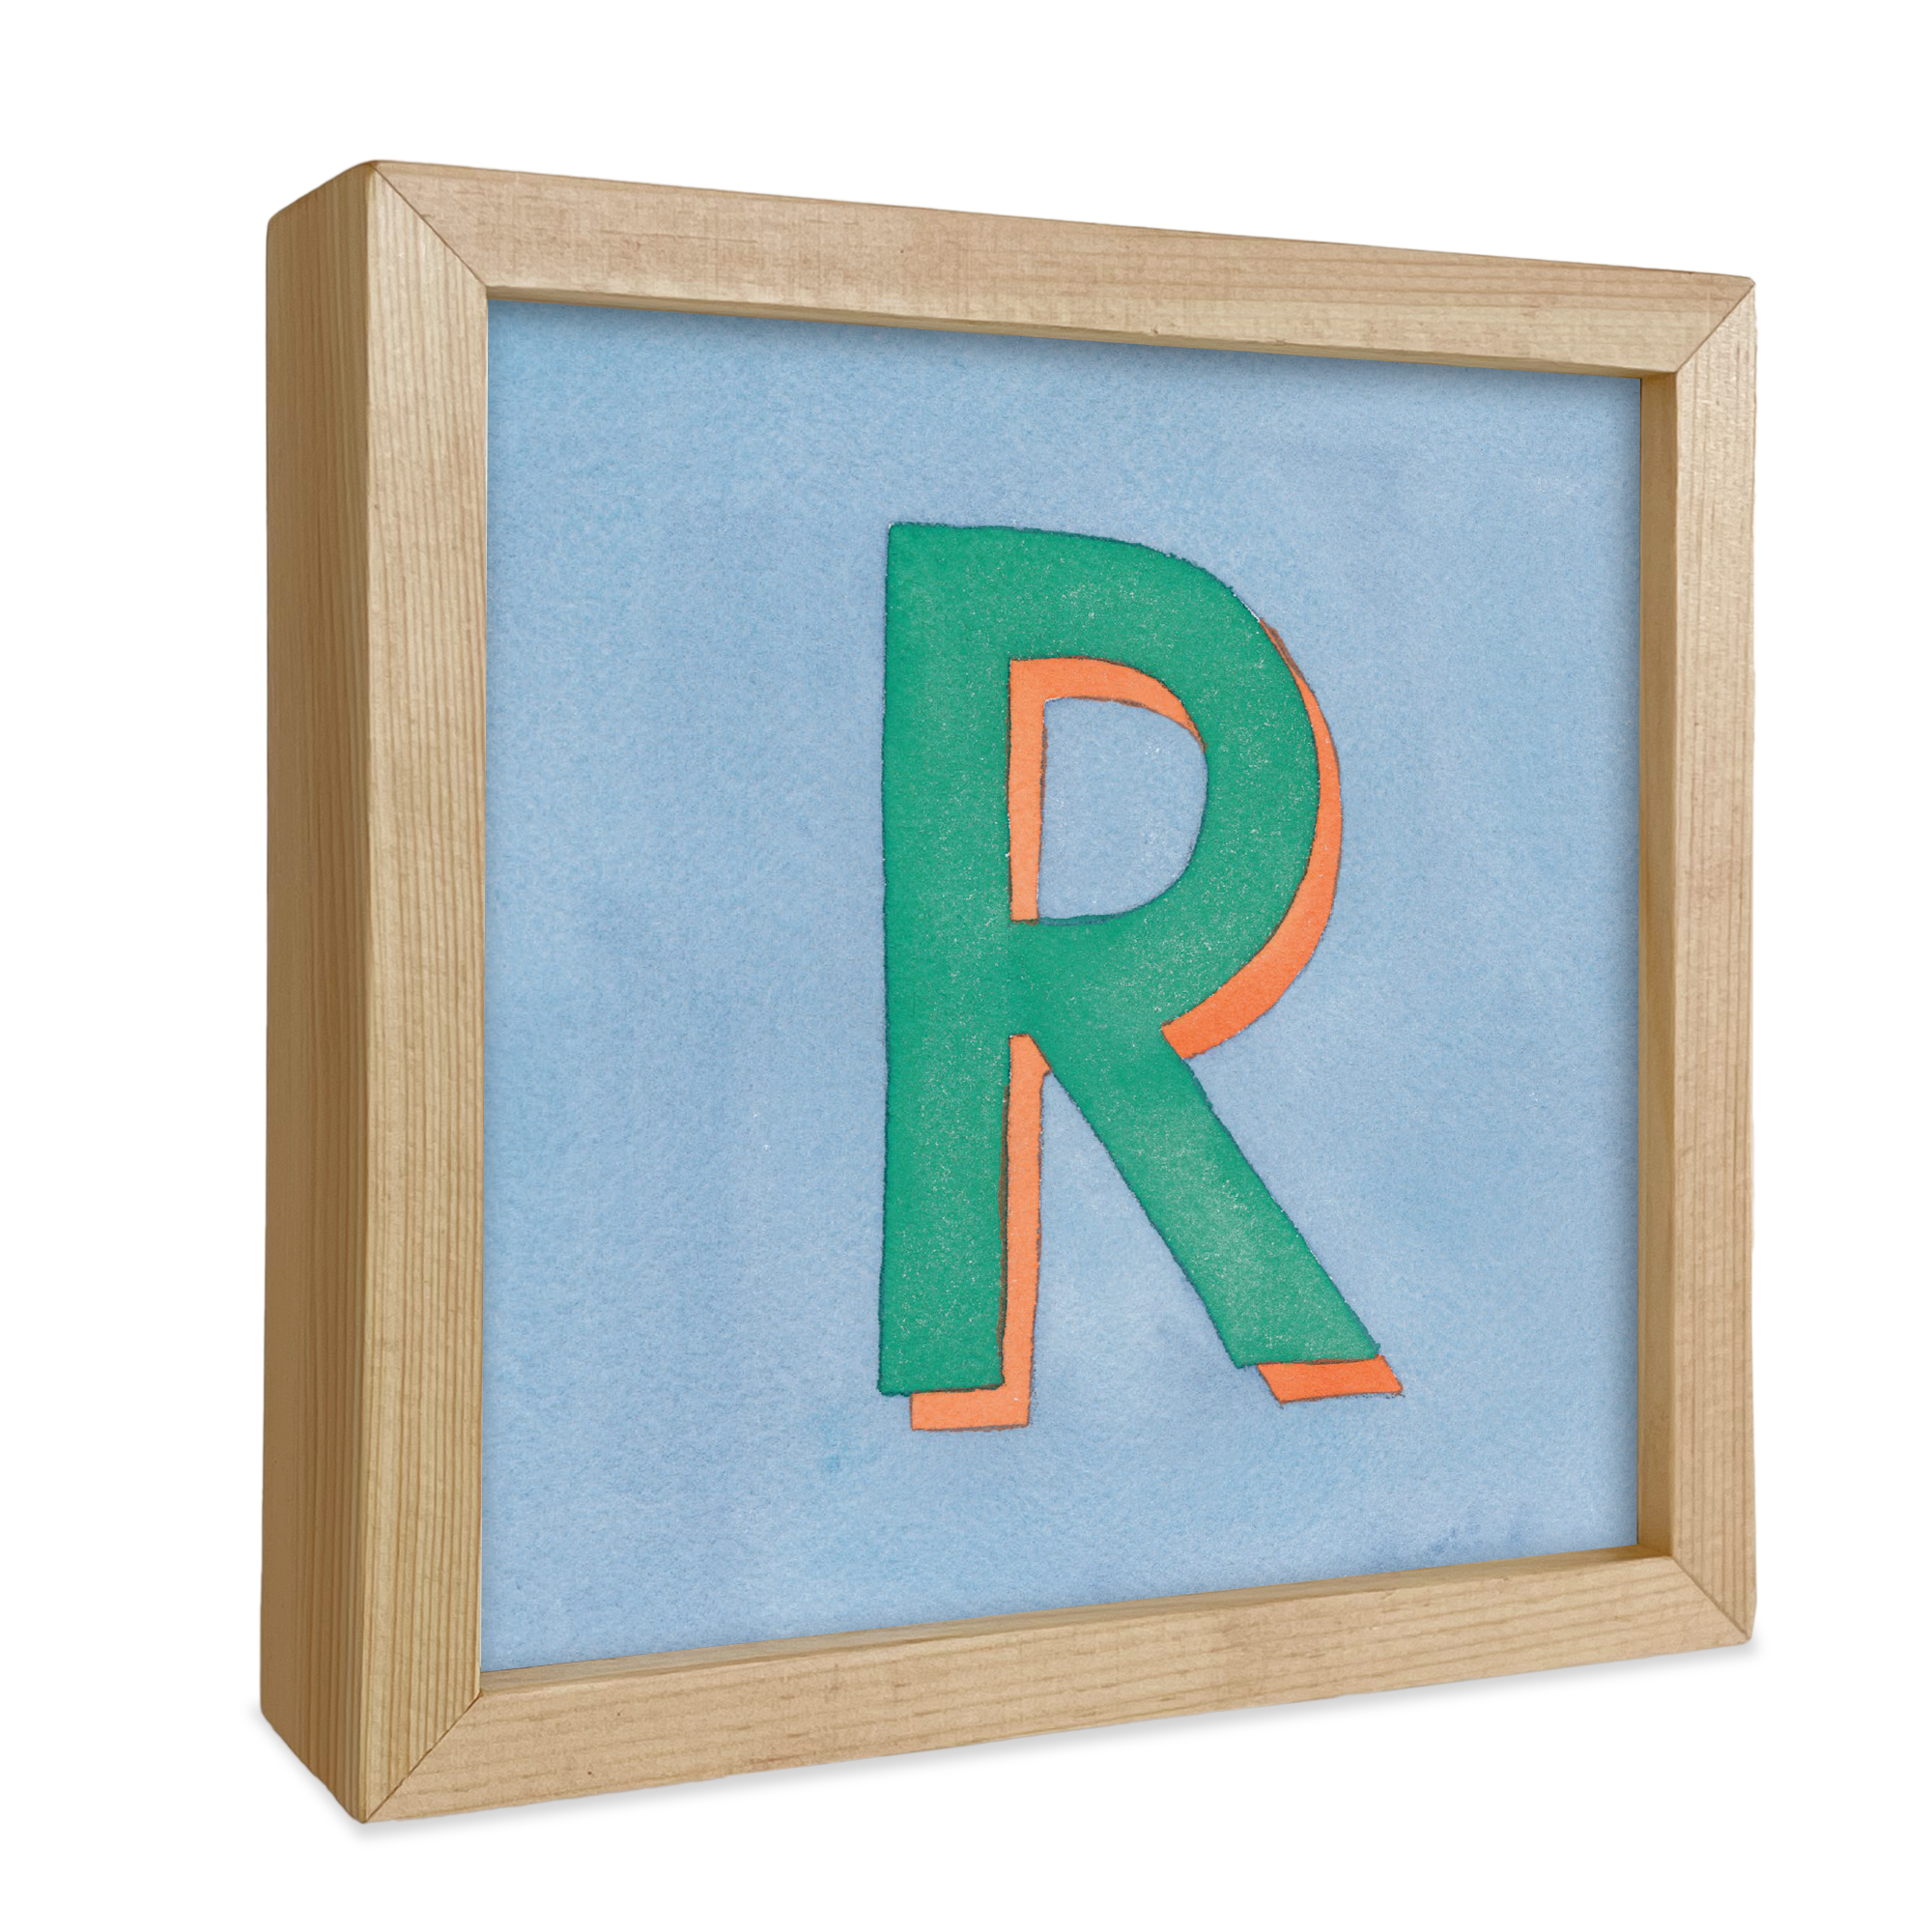 R is for... Little Print